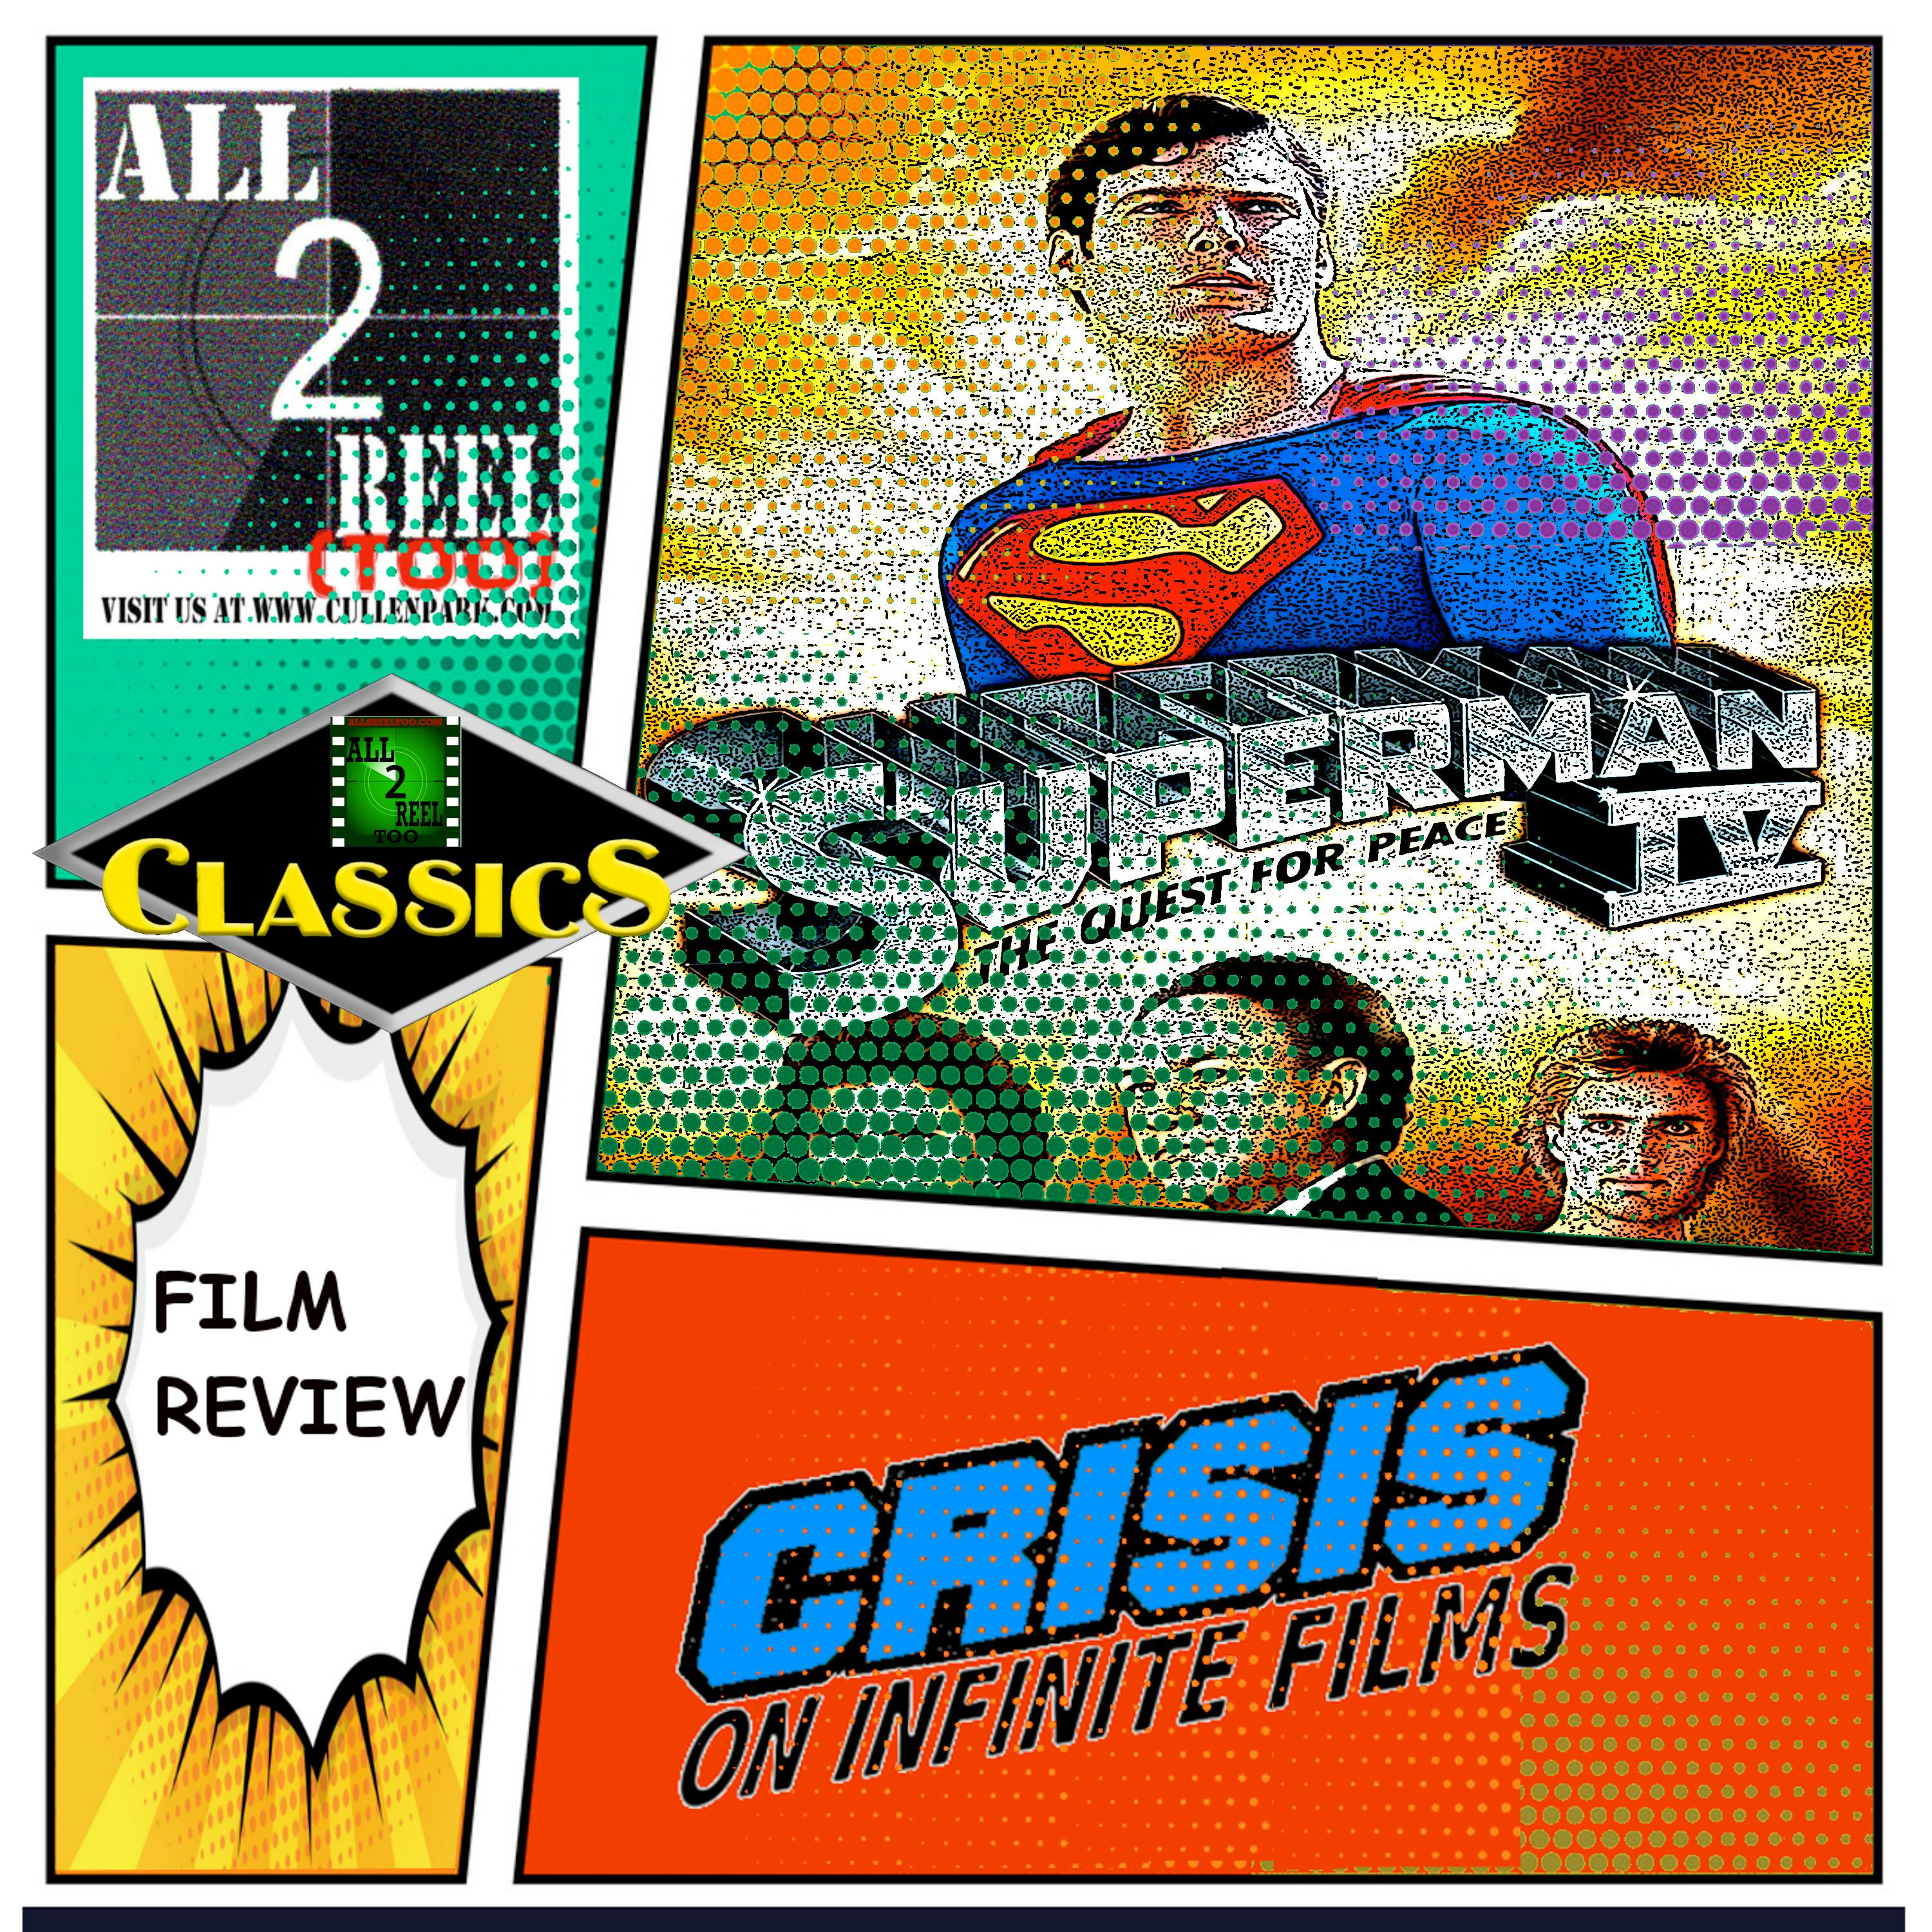 ALL2REELTOO CLASSICS - Superman IV: The Quest for Peace (1987) -Crisis On Infinite Films Image